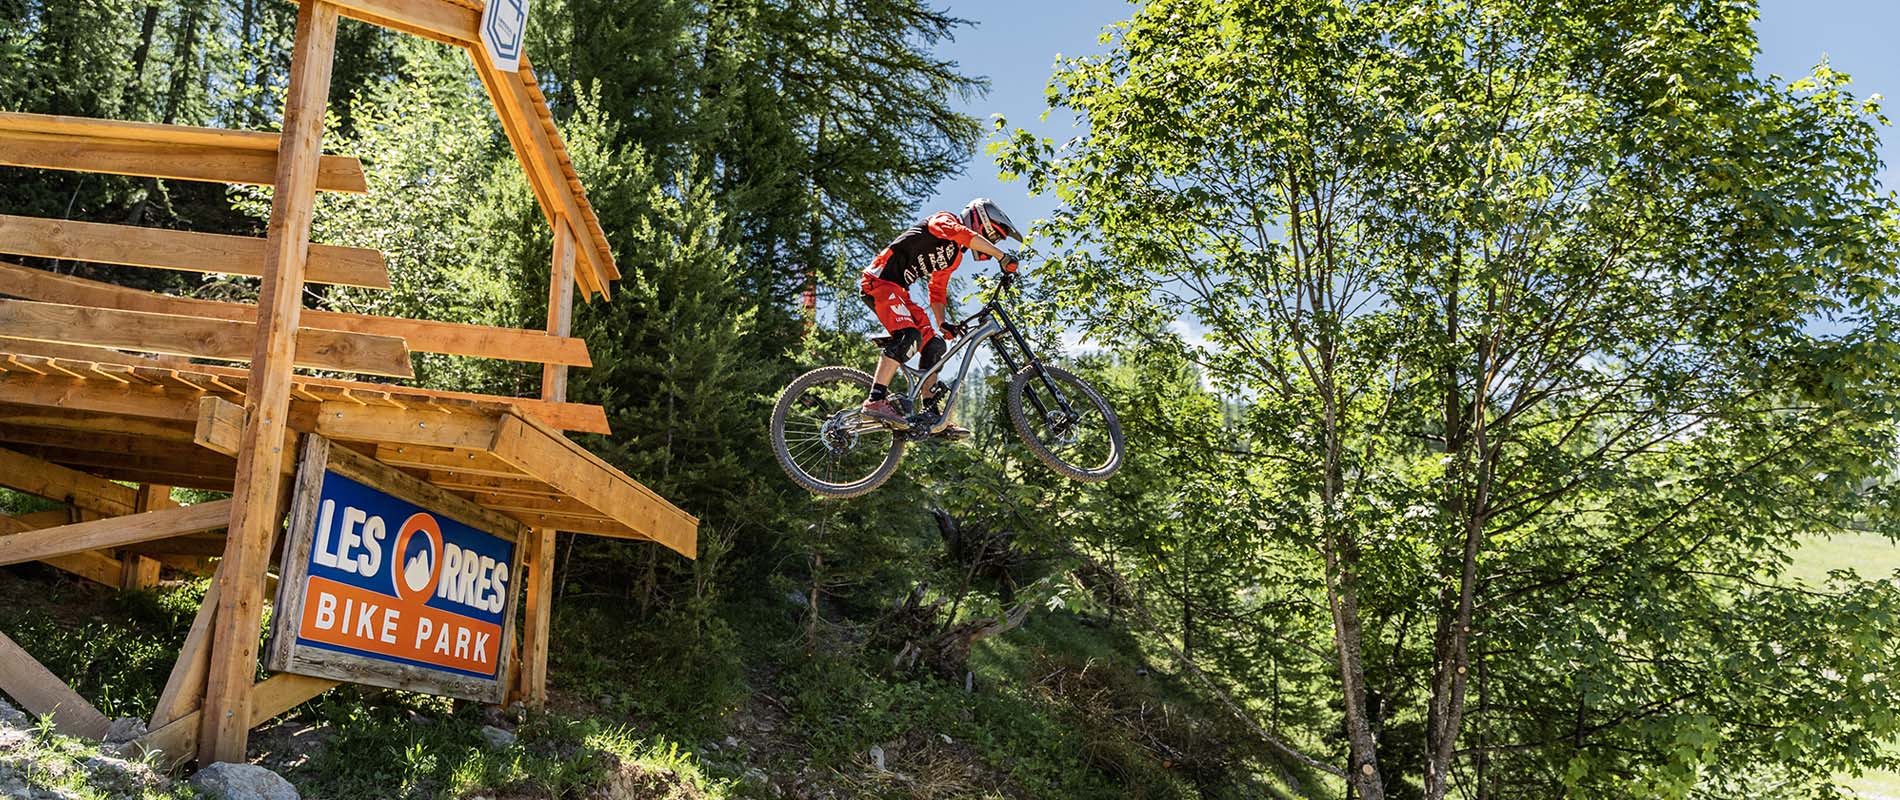 Bike park & chairlifts open on week-end of september